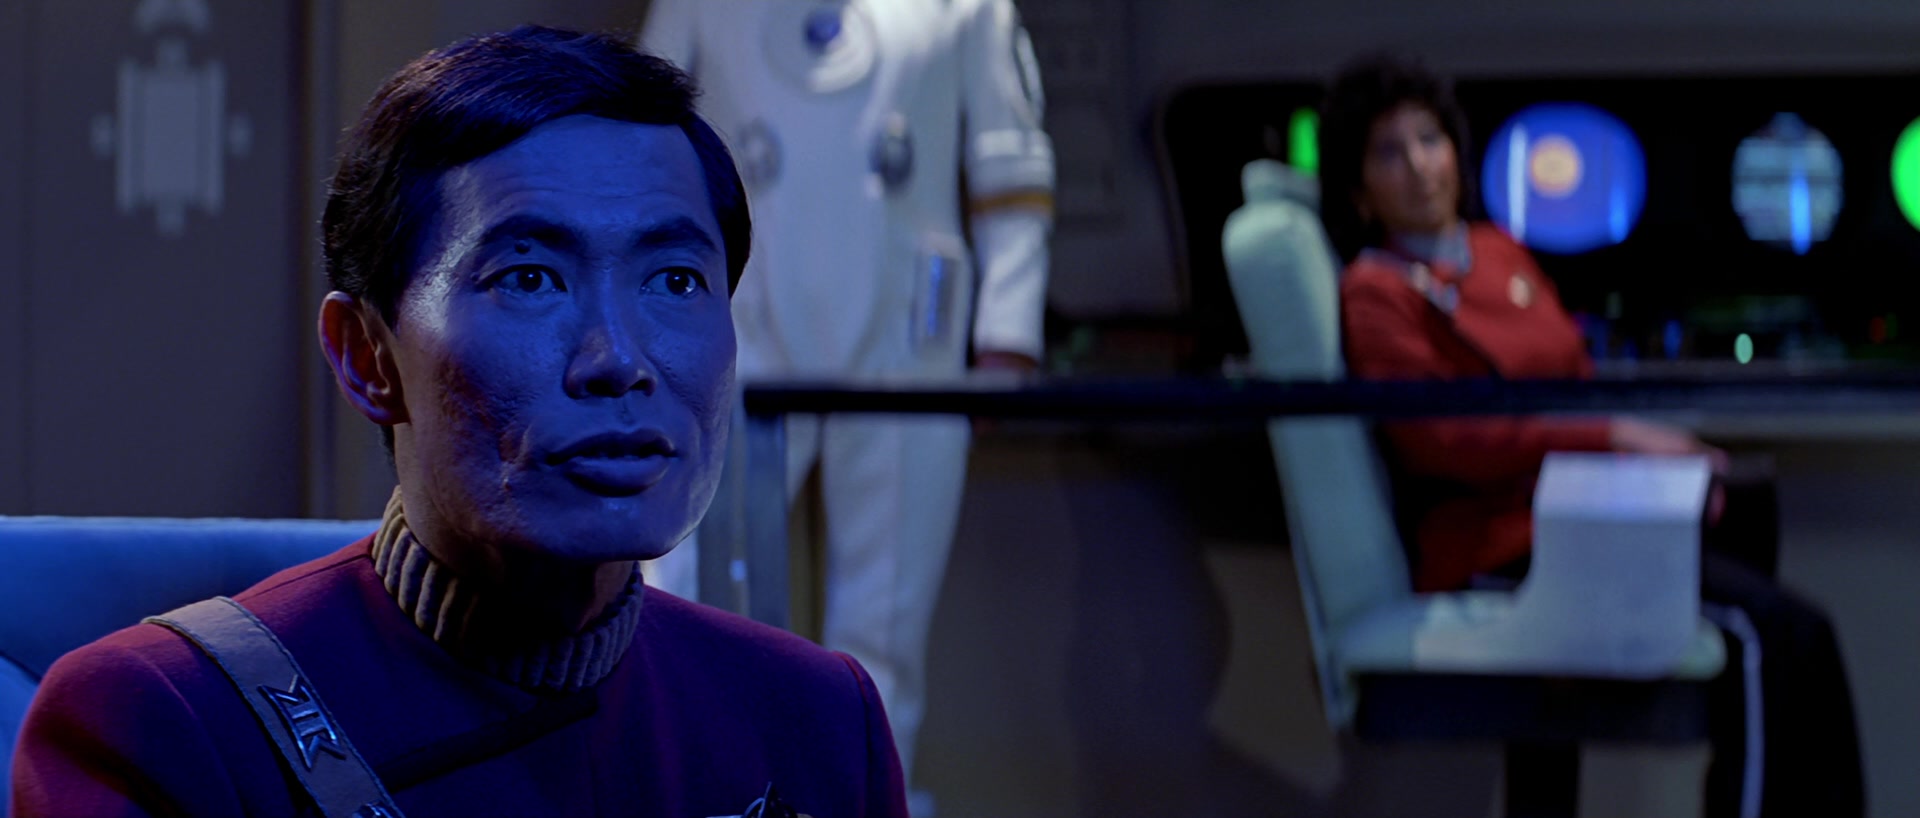 Sulu (George Takei) looks on as the Enterprise receives a transmission from Admiral Morrow (Robert Hooks) in Star Trek III: The Search for Spock (1984), Paramount Pictures via Blu-ray